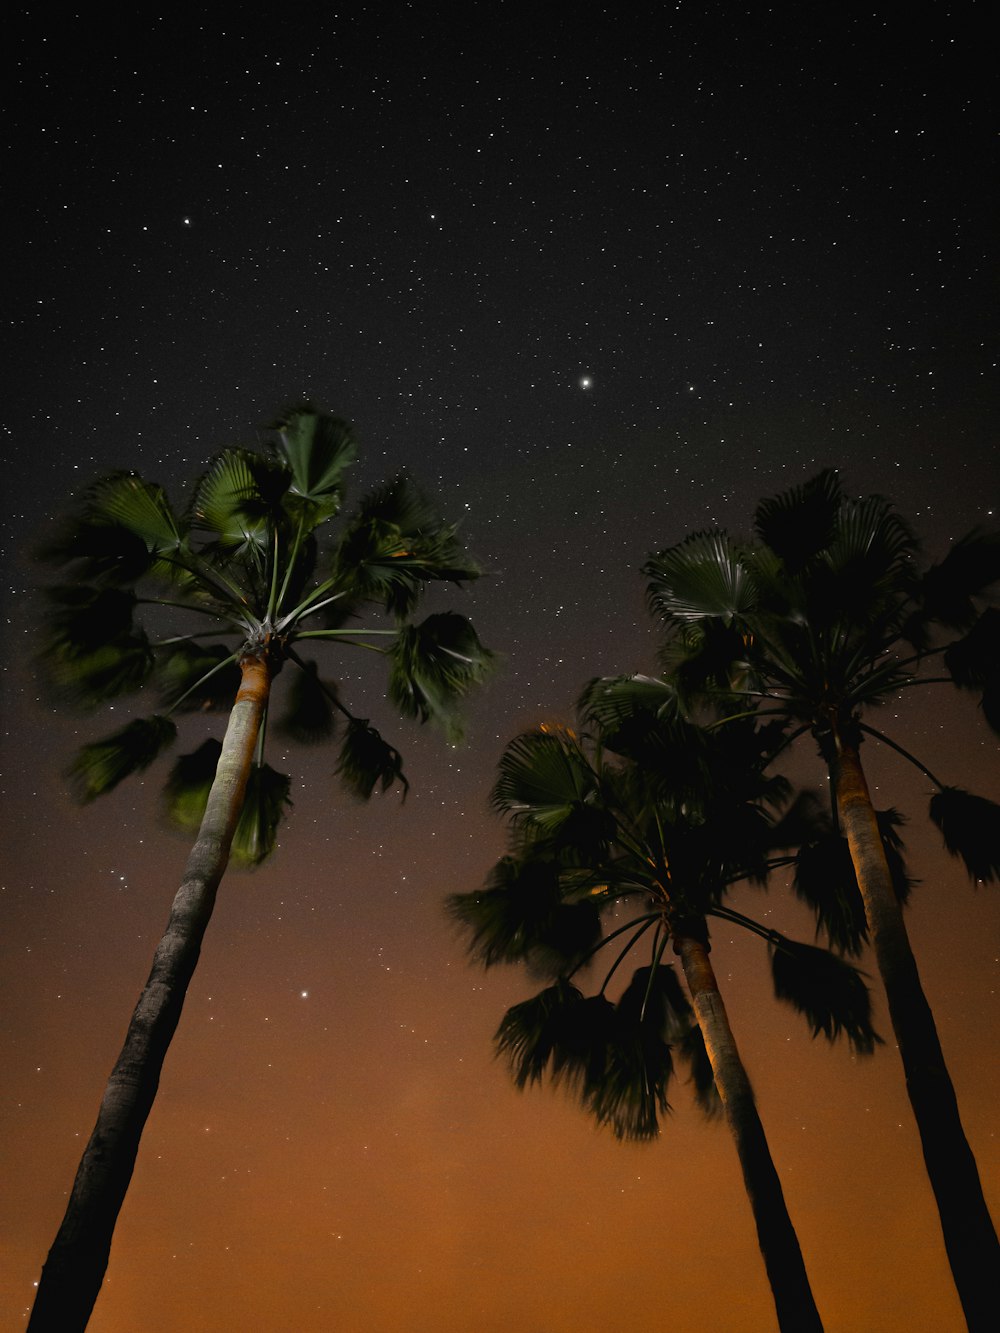 three coconut trees during nighttime